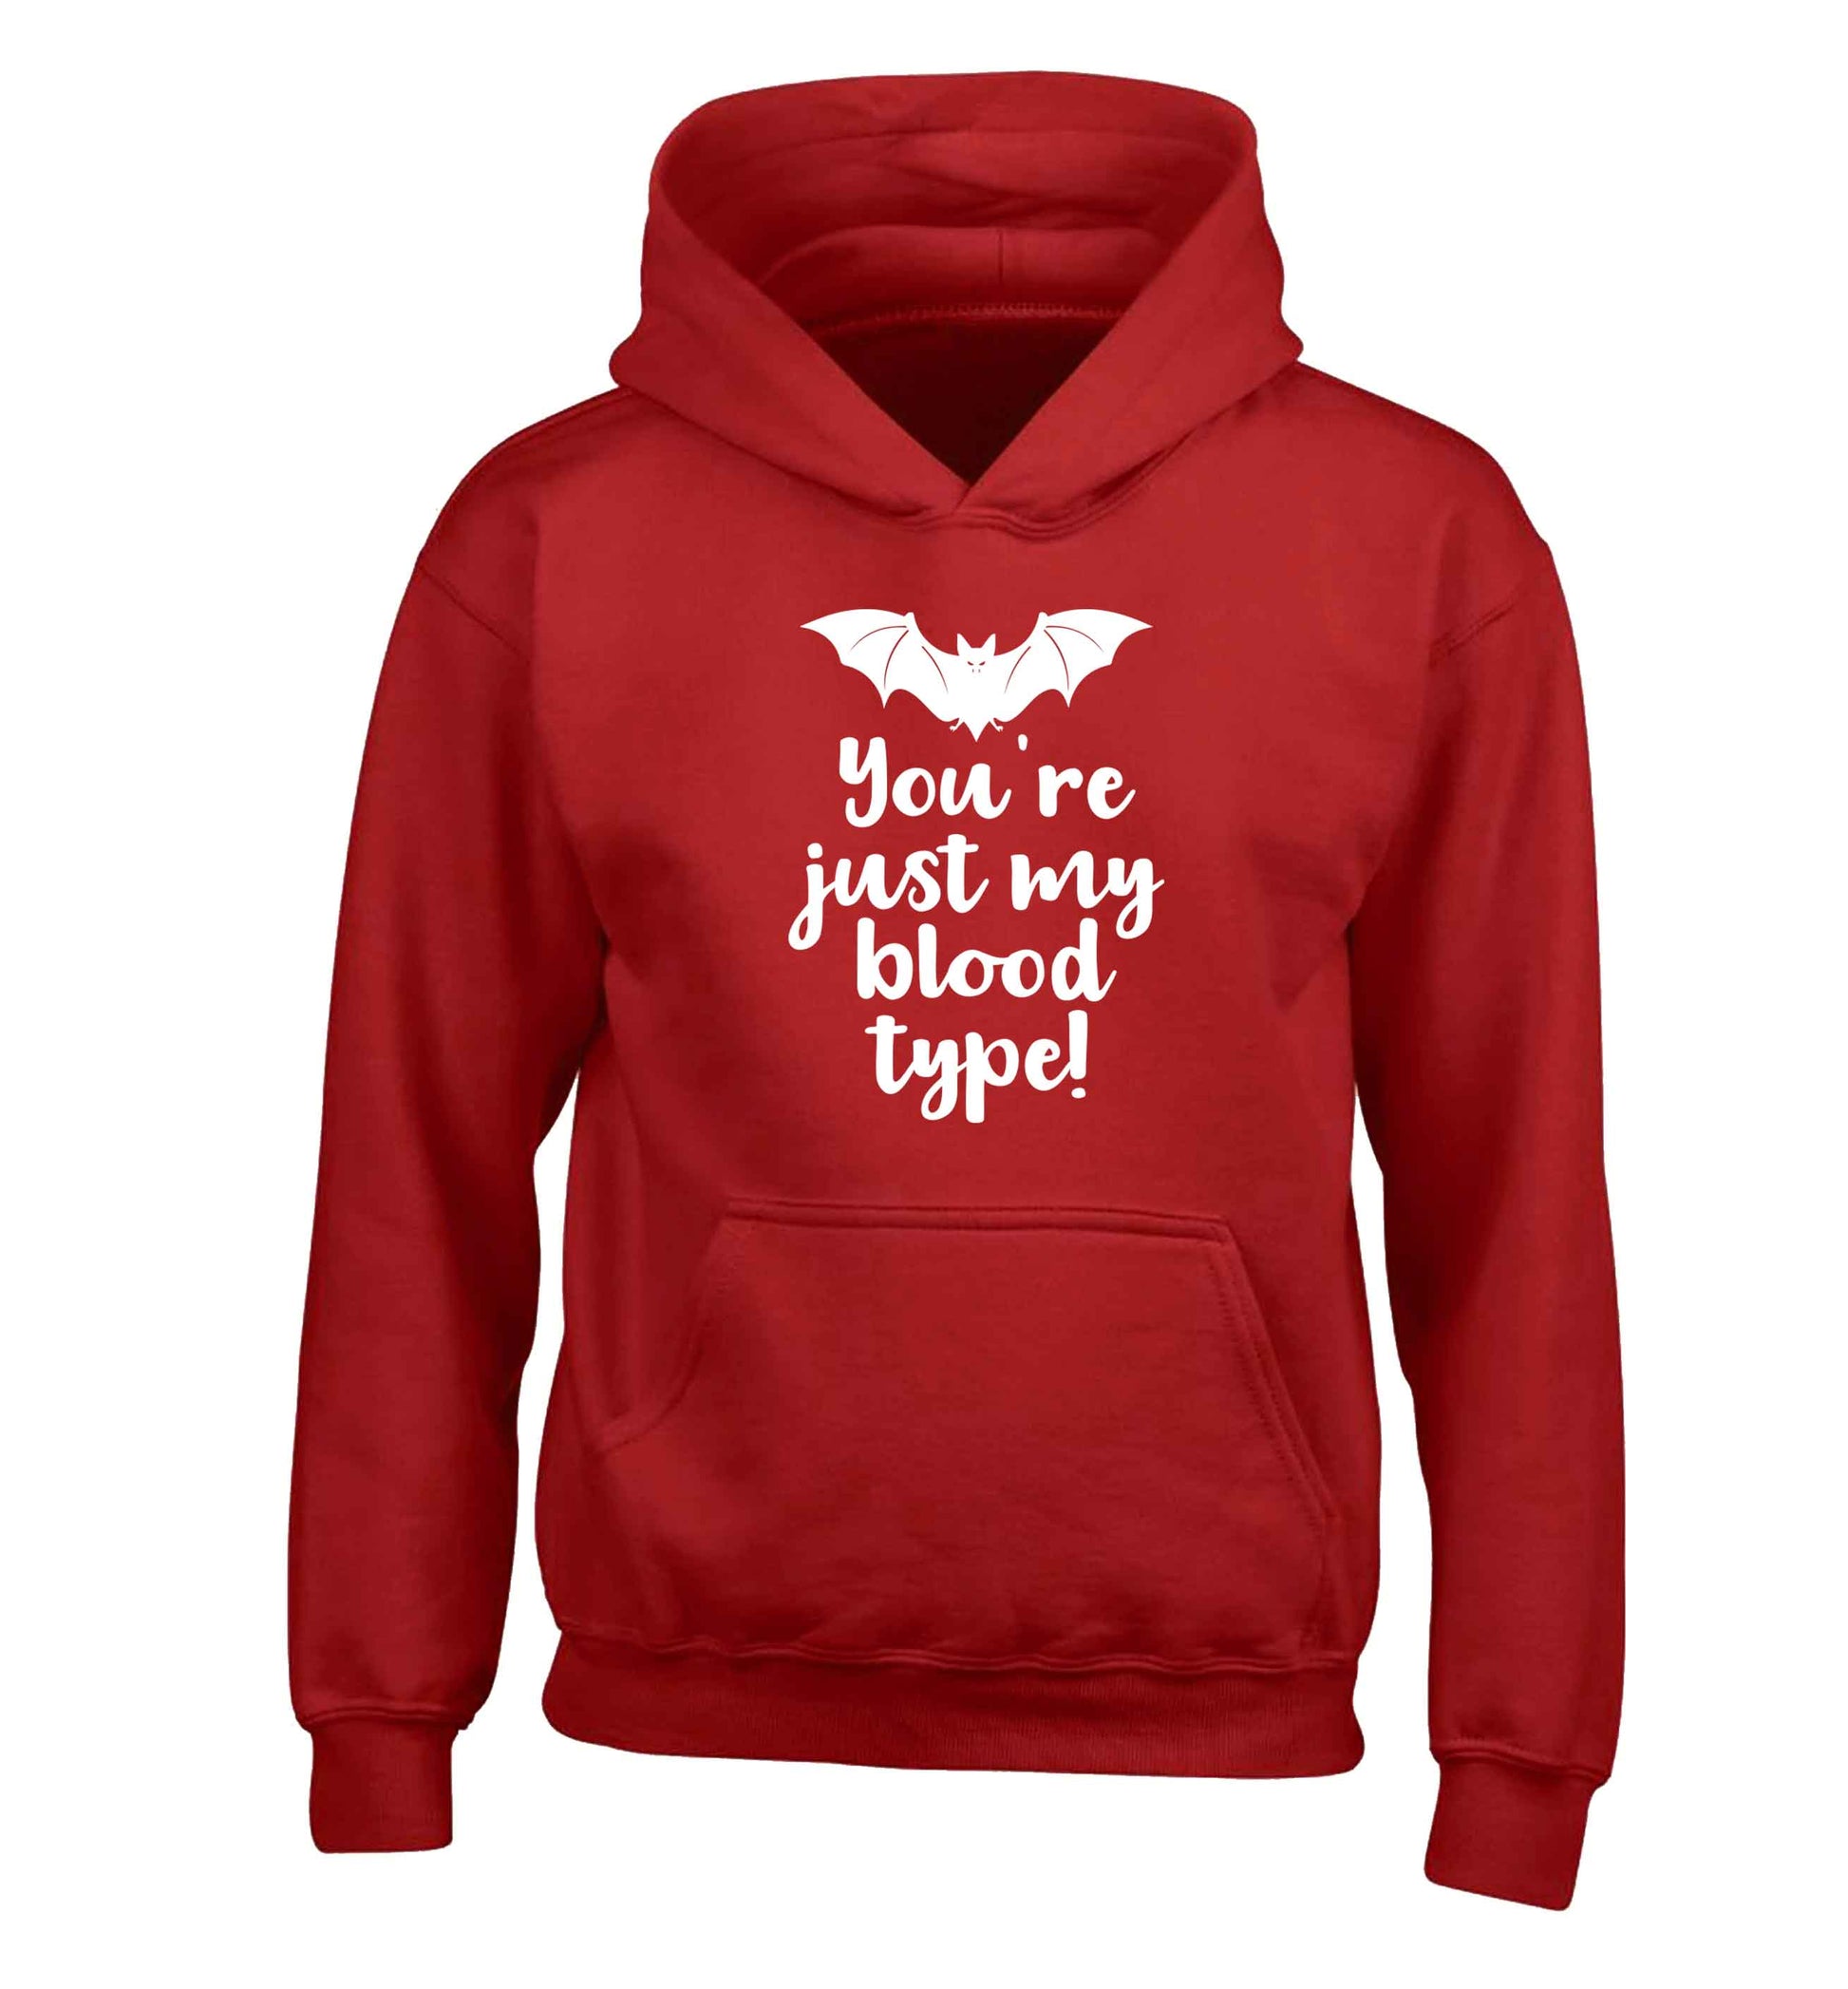 You're just my blood type children's red hoodie 12-13 Years